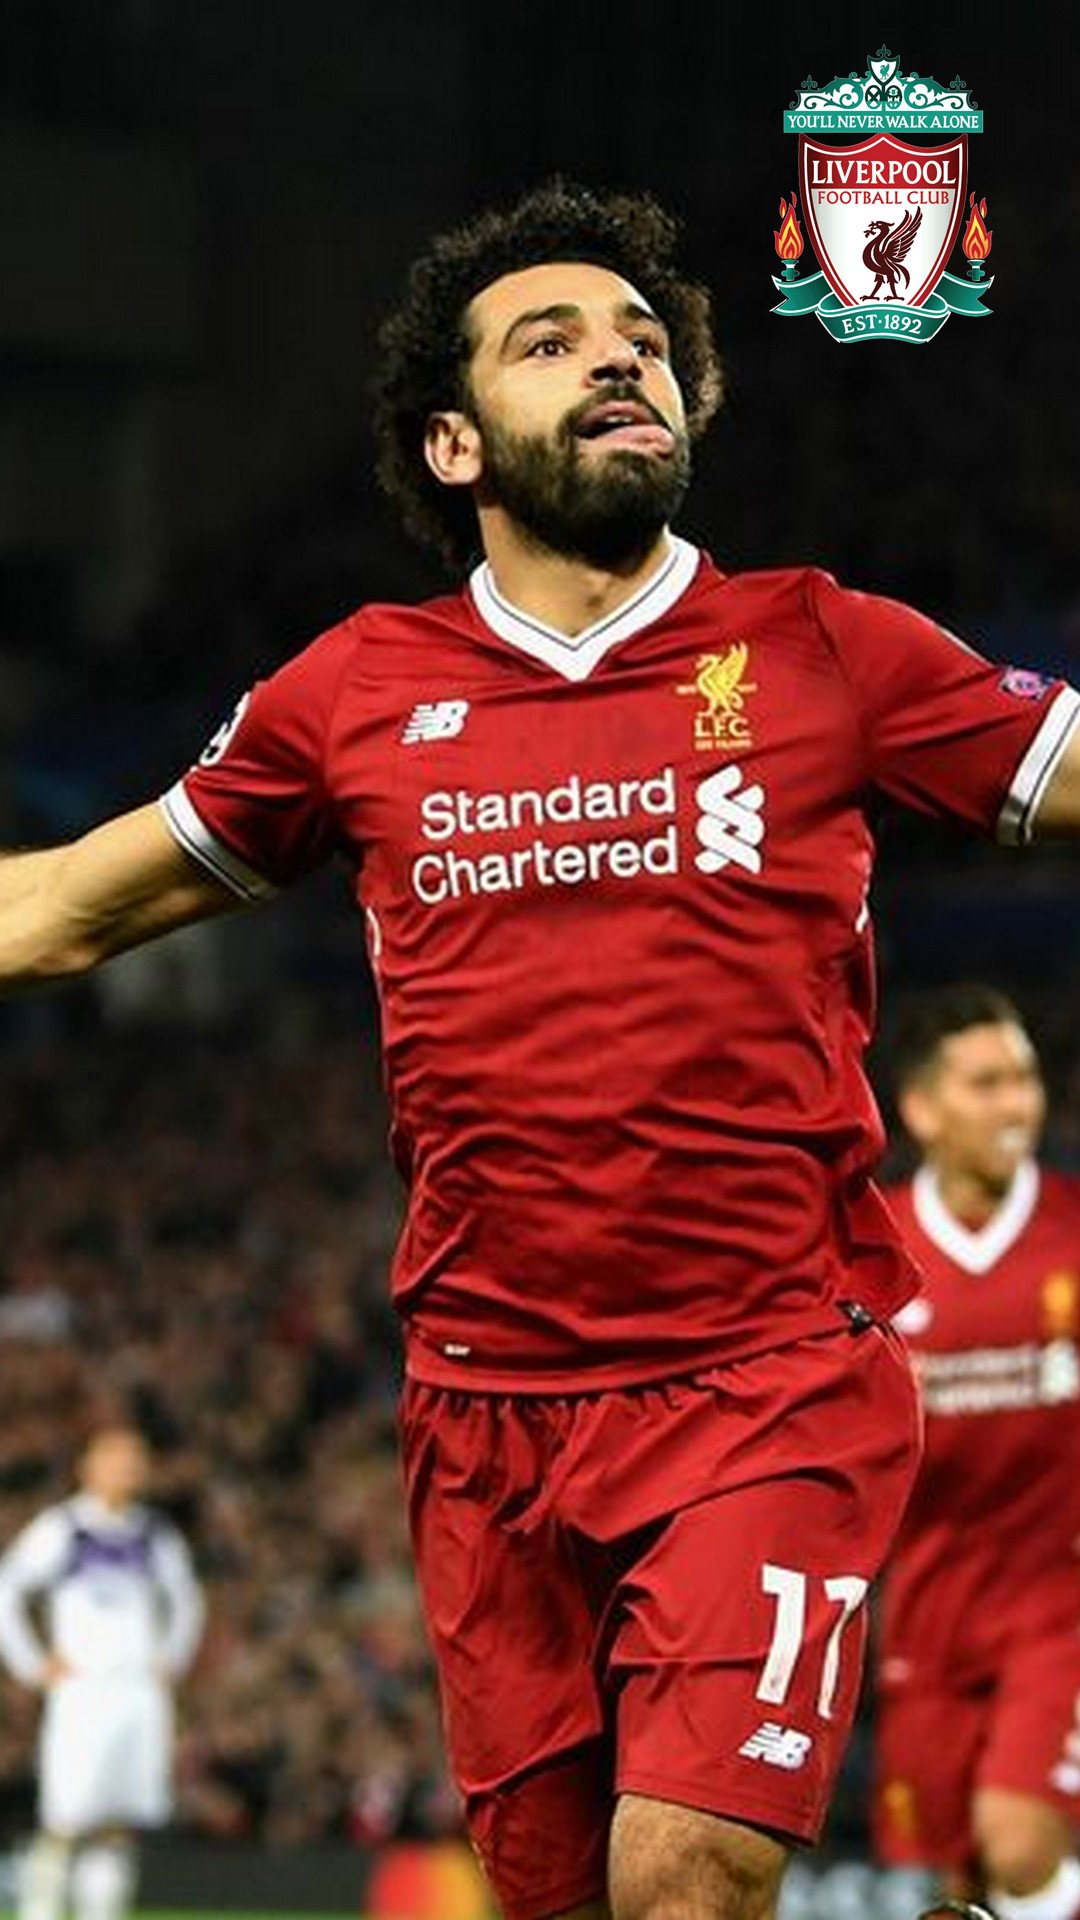 Wallpaper Mohamed Salah Liverpool Android with image resolution 1080x1920 pixel. You can make this wallpaper for your Android backgrounds, Tablet, Smartphones Screensavers and Mobile Phone Lock Screen